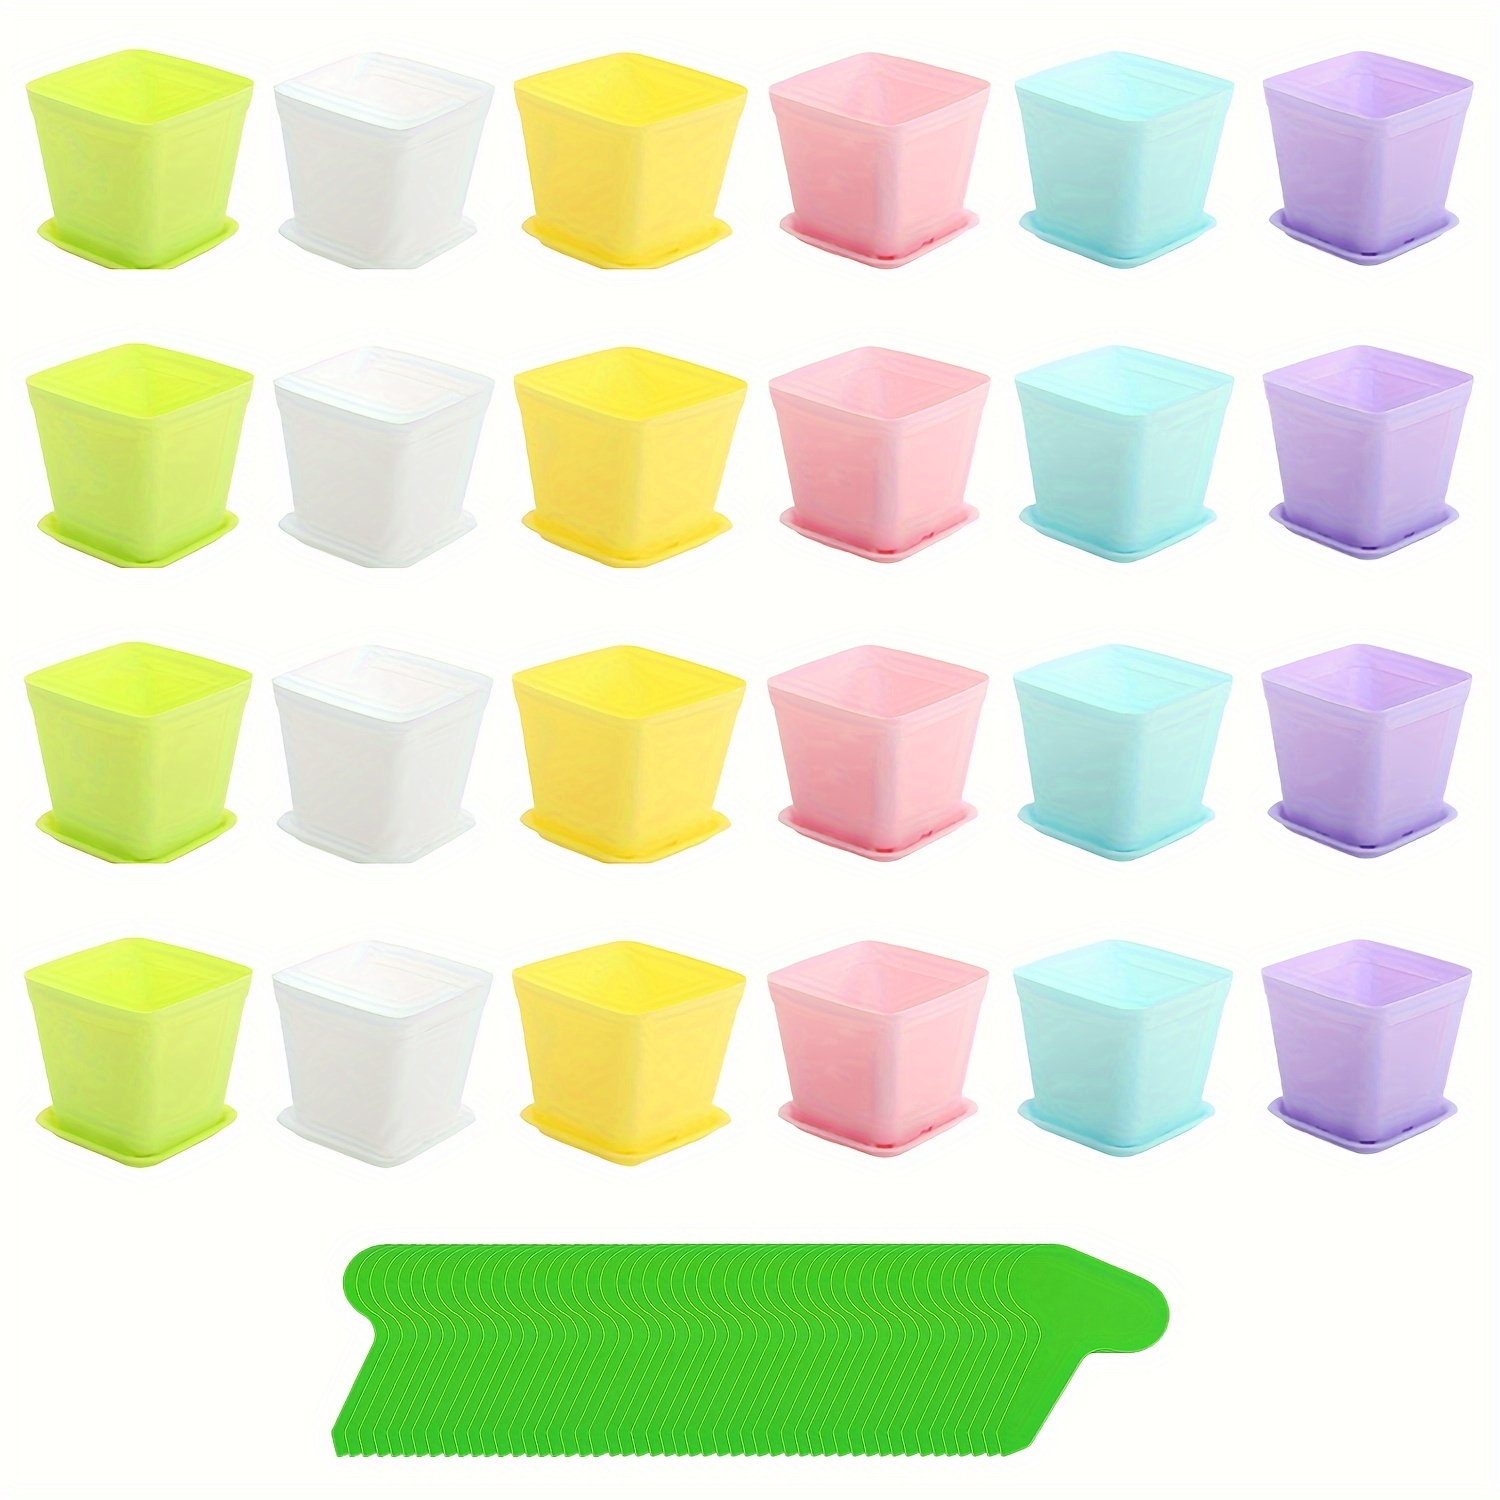 

24pcs, 3 Inch Colorful Plastic Plant Pot With 50 Flower Labels,plastic Square Nursery Pots,seedling Nursery Pots With Saucers For Garden,home,office,balcony Decor,garden Gifts